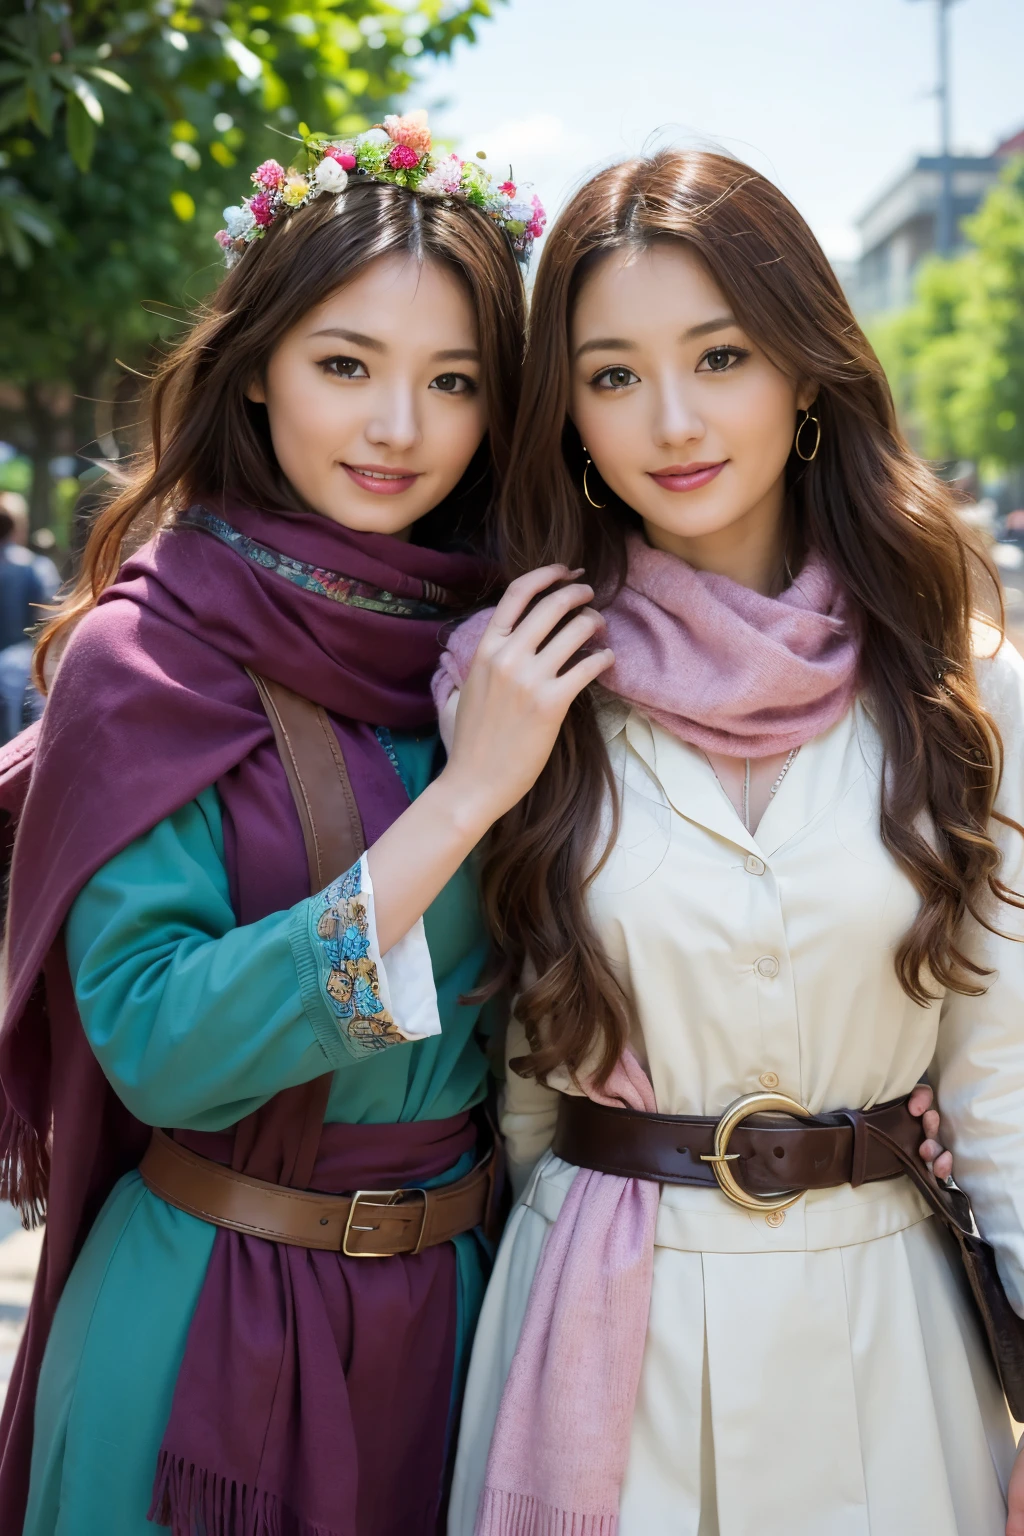 2girls, curious, fearless, smiling, wavy brown hair, dressed in colorful clothes and a magical scarf, next to the old fairy queen,​masterpiece, top-quality,raw photograph, top-quality, Official Art ,the Extremely Detailed CG Unity 8K Wallpapers, 